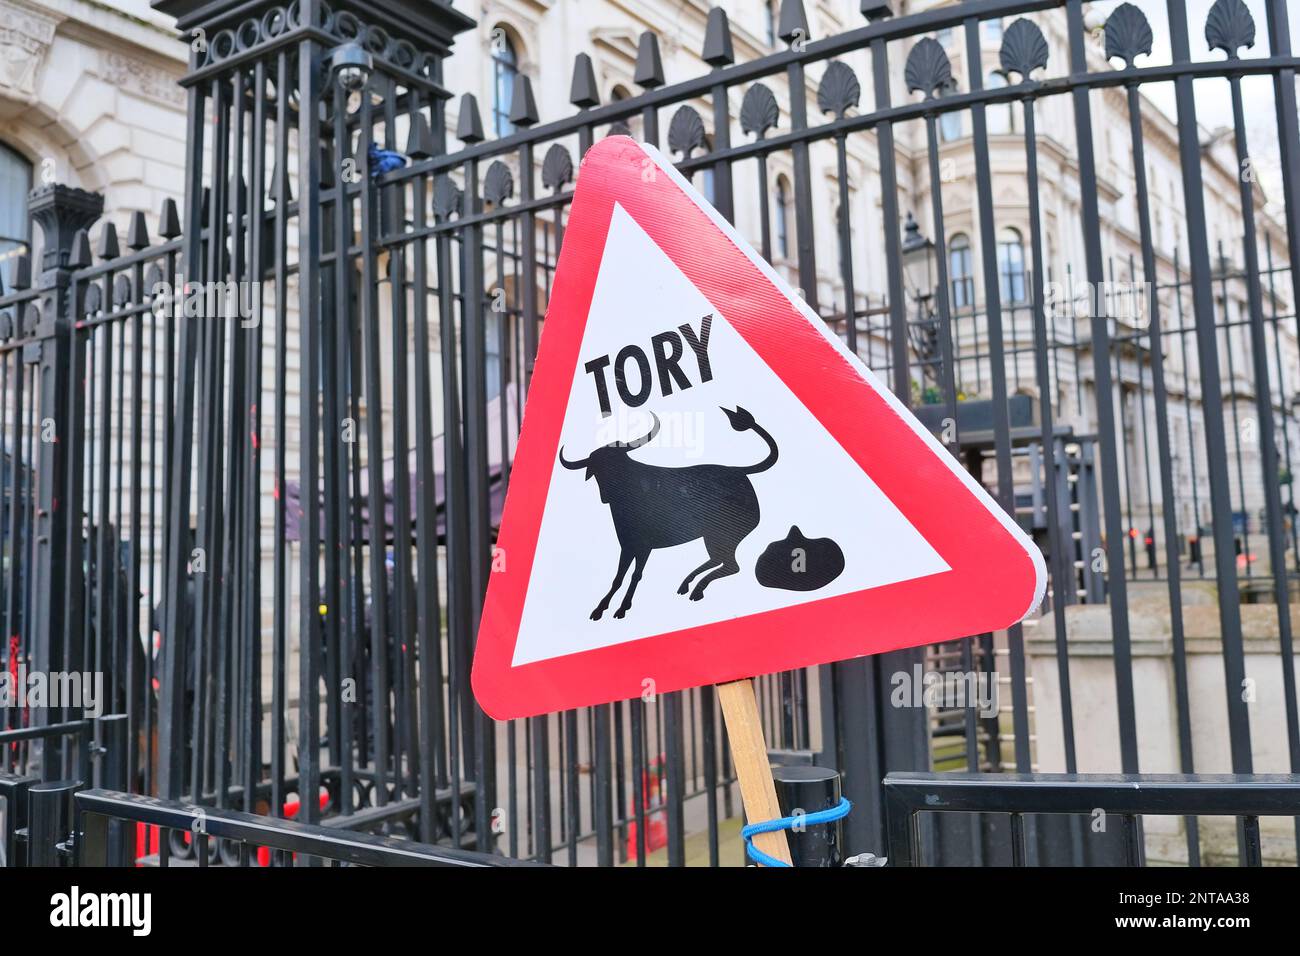 London, UK. A mock road sign warning of 'Tory bullshit', placed by anti-Brexit protesters outside the gates of Downing Street. Stock Photo